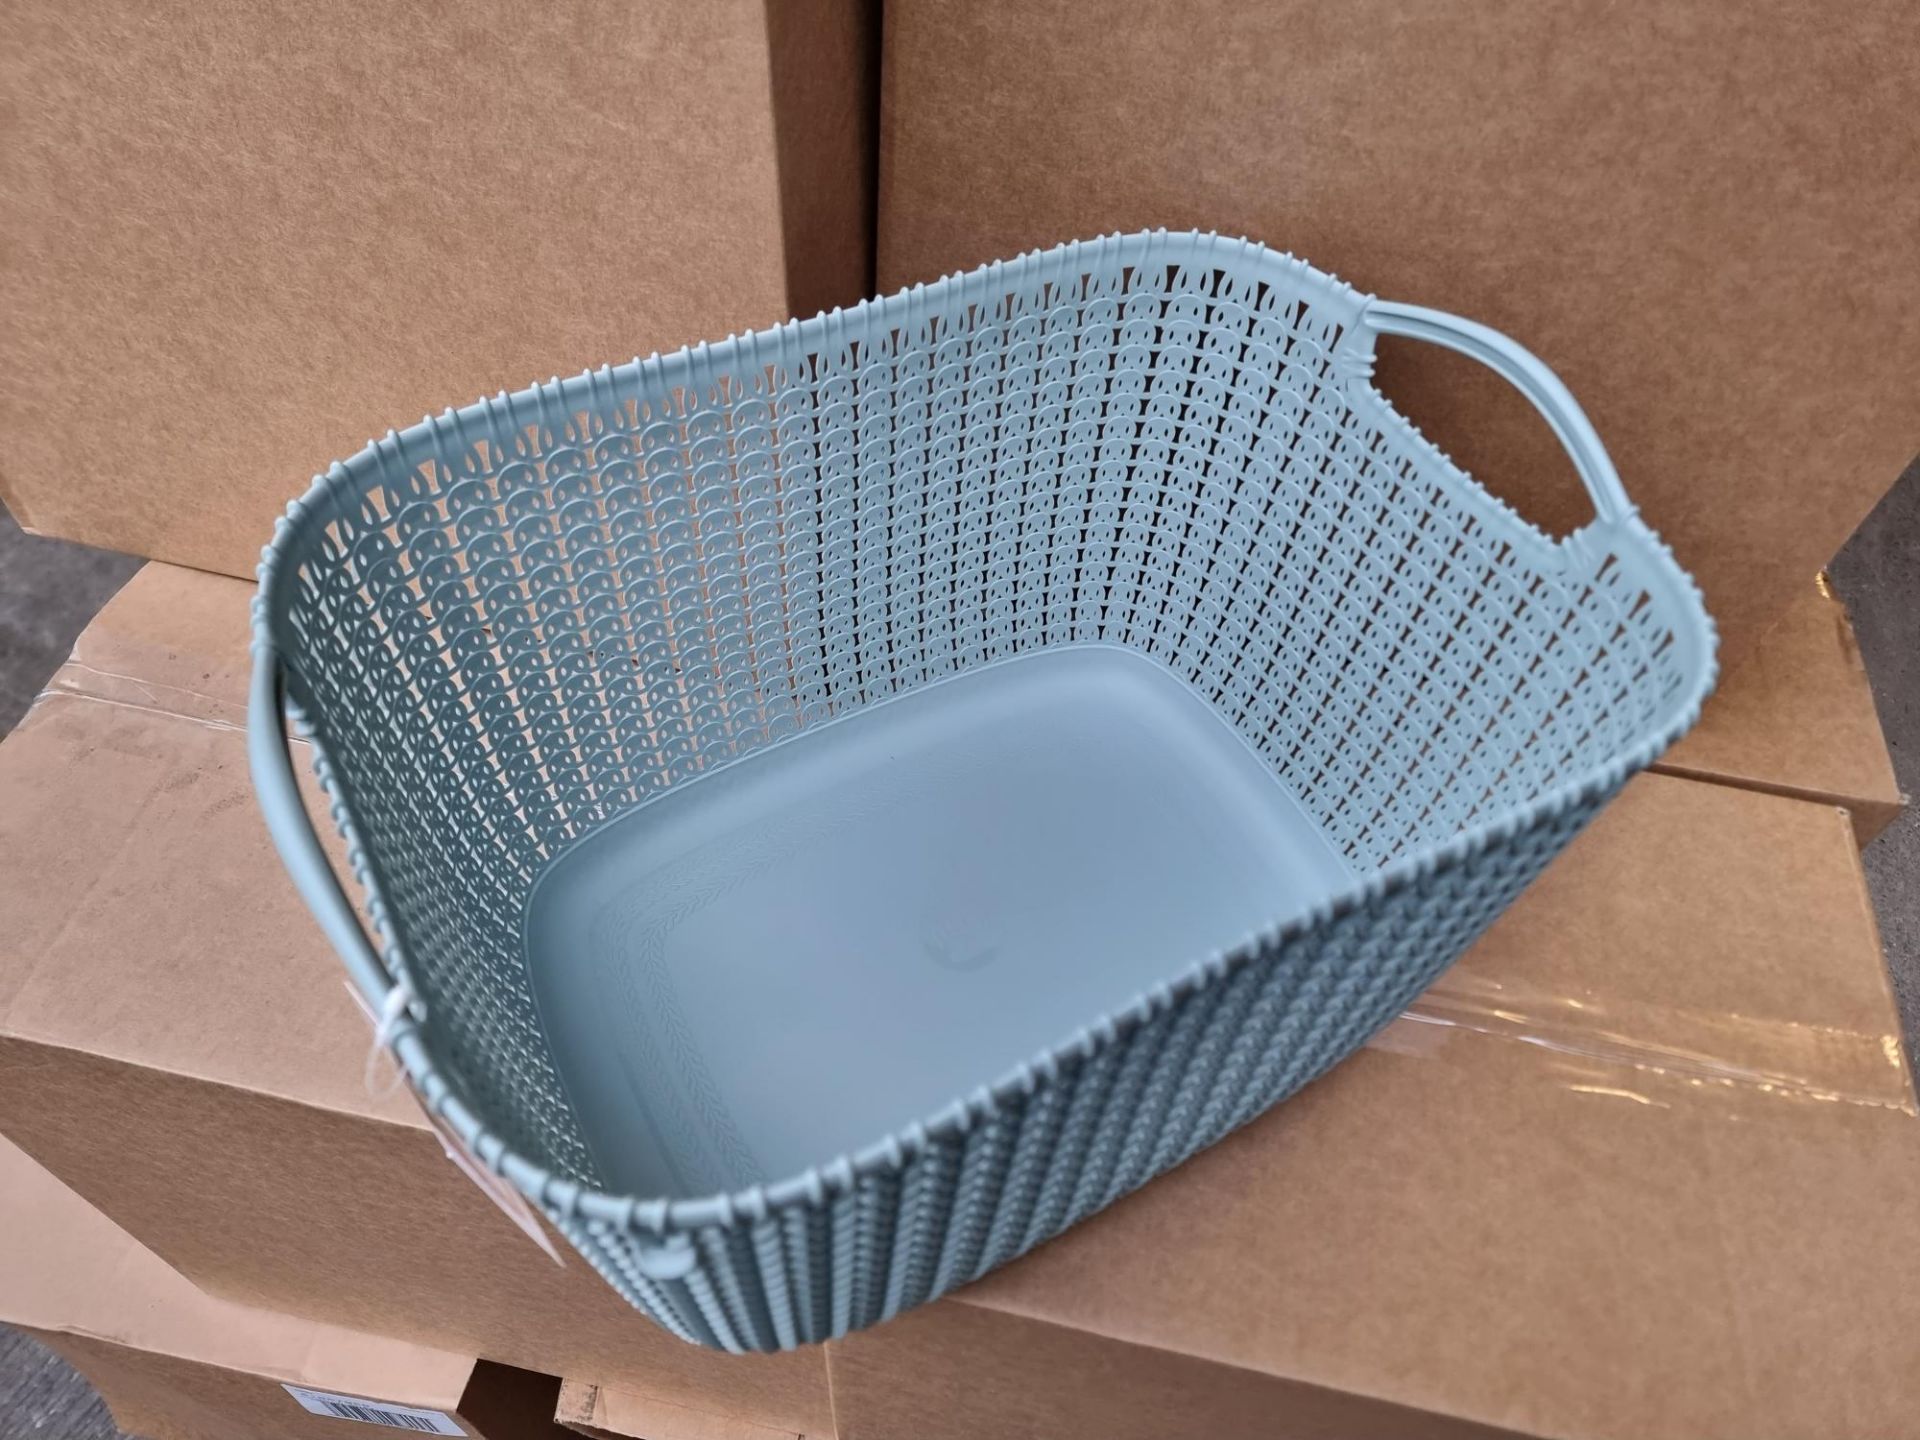 PALLET TO CONTAIN 100 X NEW PACKAGED Curver Knit Rectangular Storage Basket - 19 Litres, Misty Blue. - Image 4 of 5